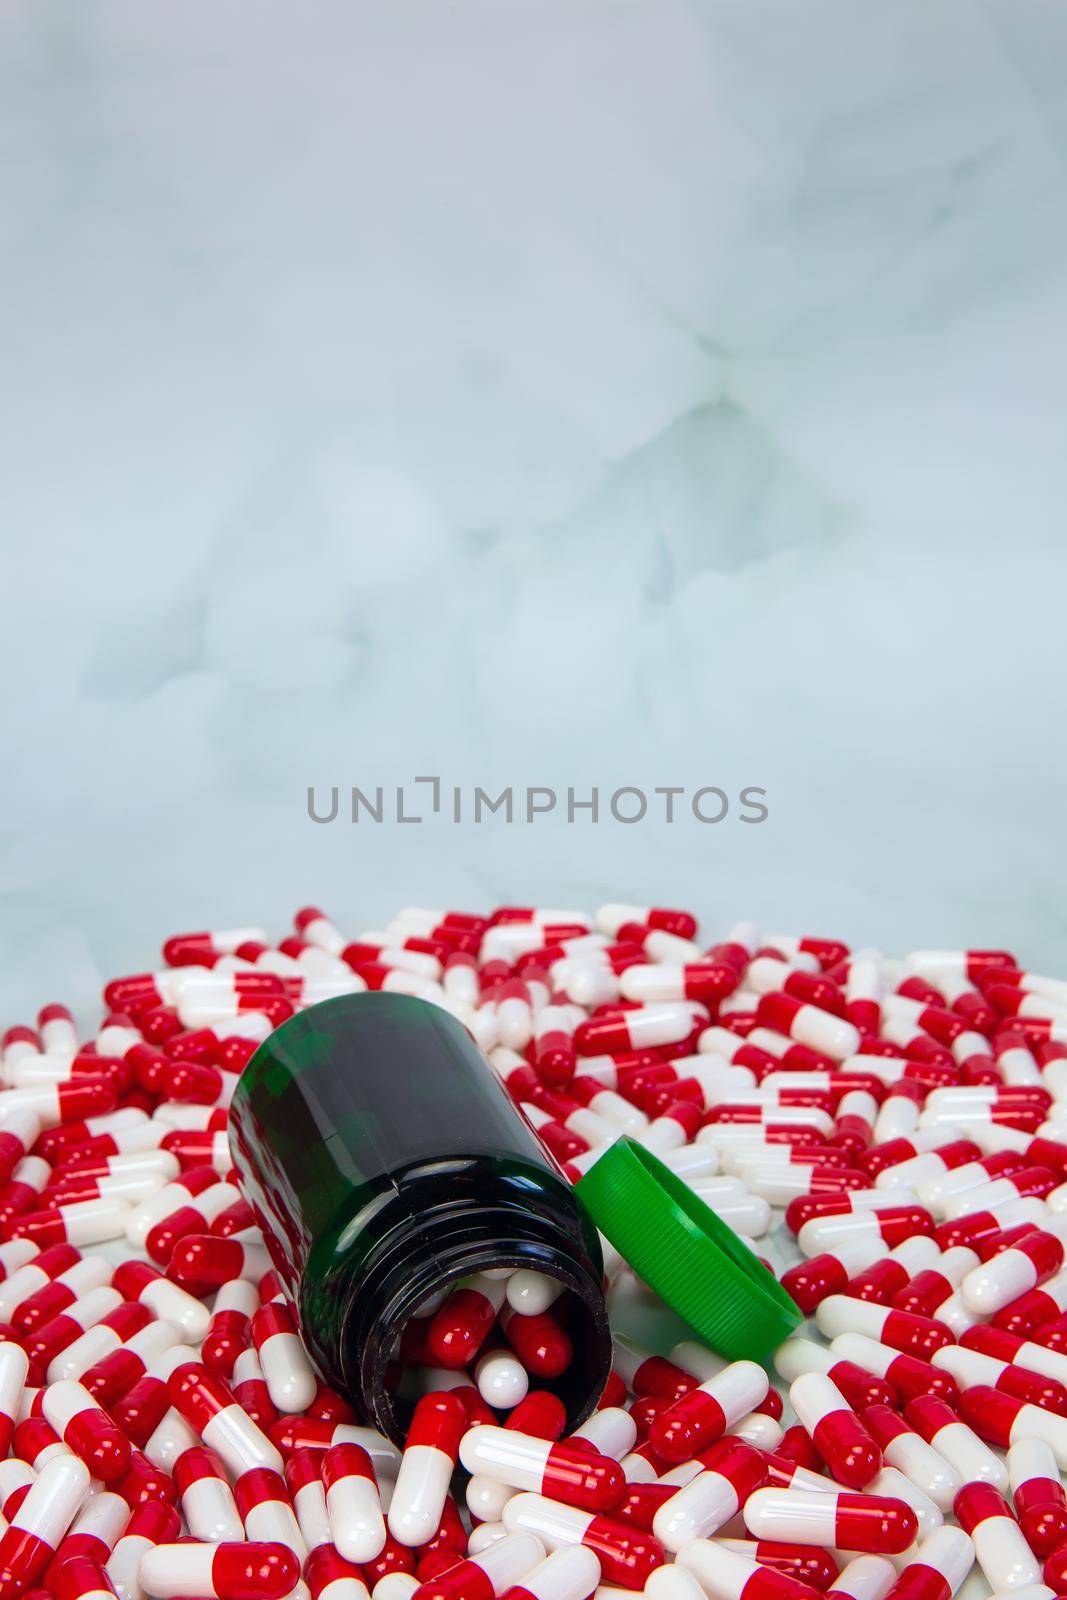 Bottle with red and white capsule on white background, Vitamin,drugs or pharmaceutical medication background, Health, medical and business concept by Annebel146